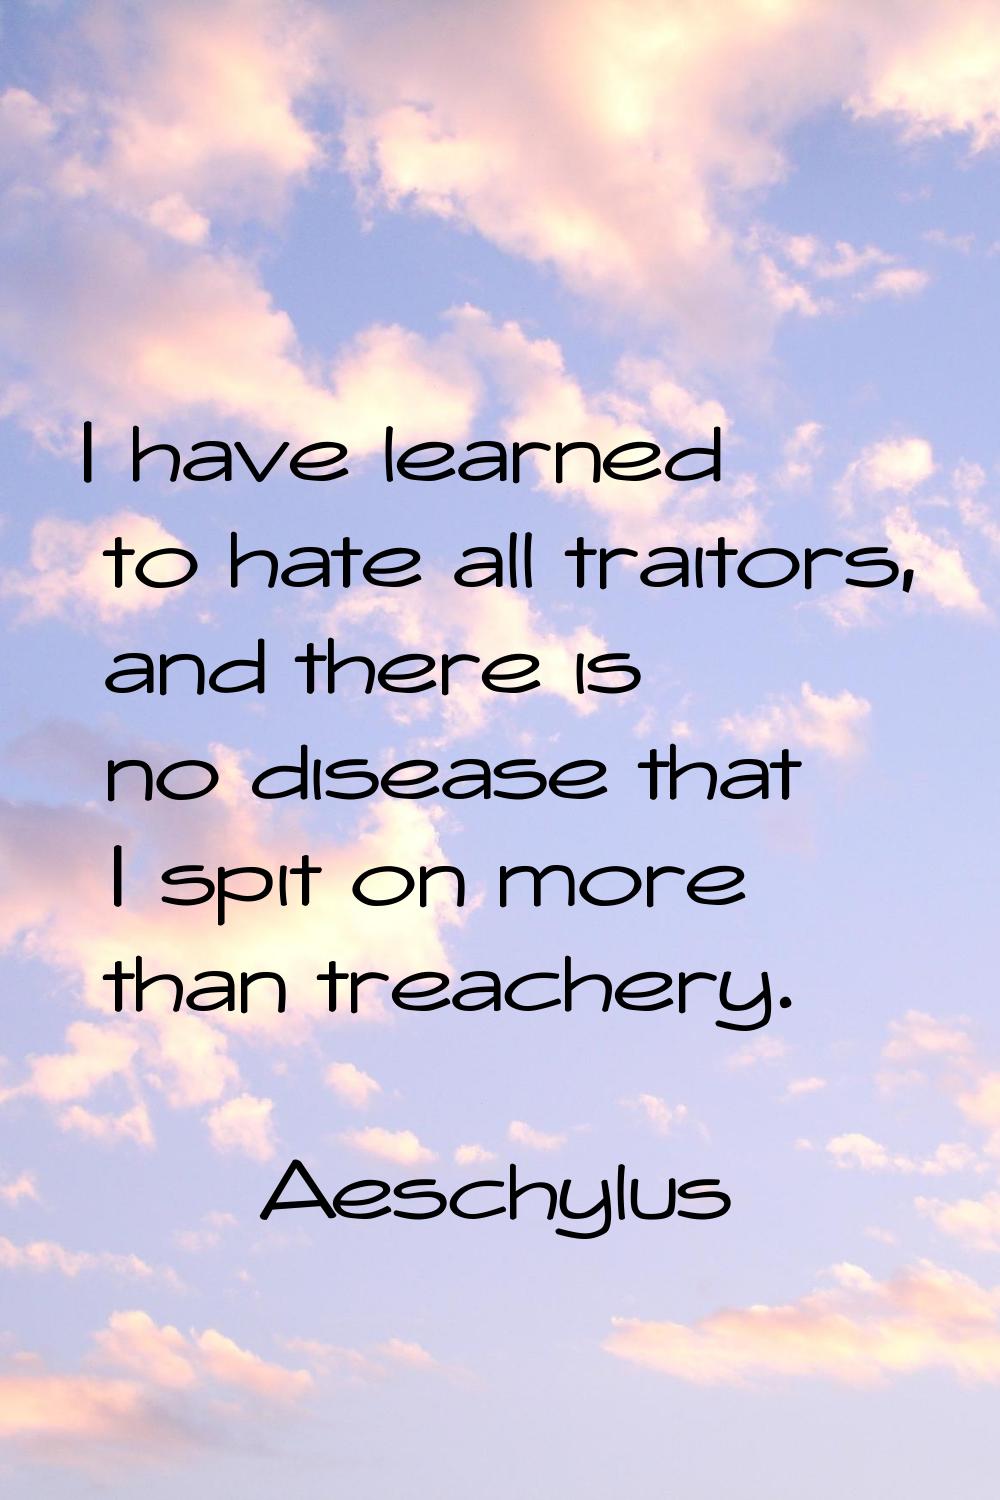 I have learned to hate all traitors, and there is no disease that I spit on more than treachery.